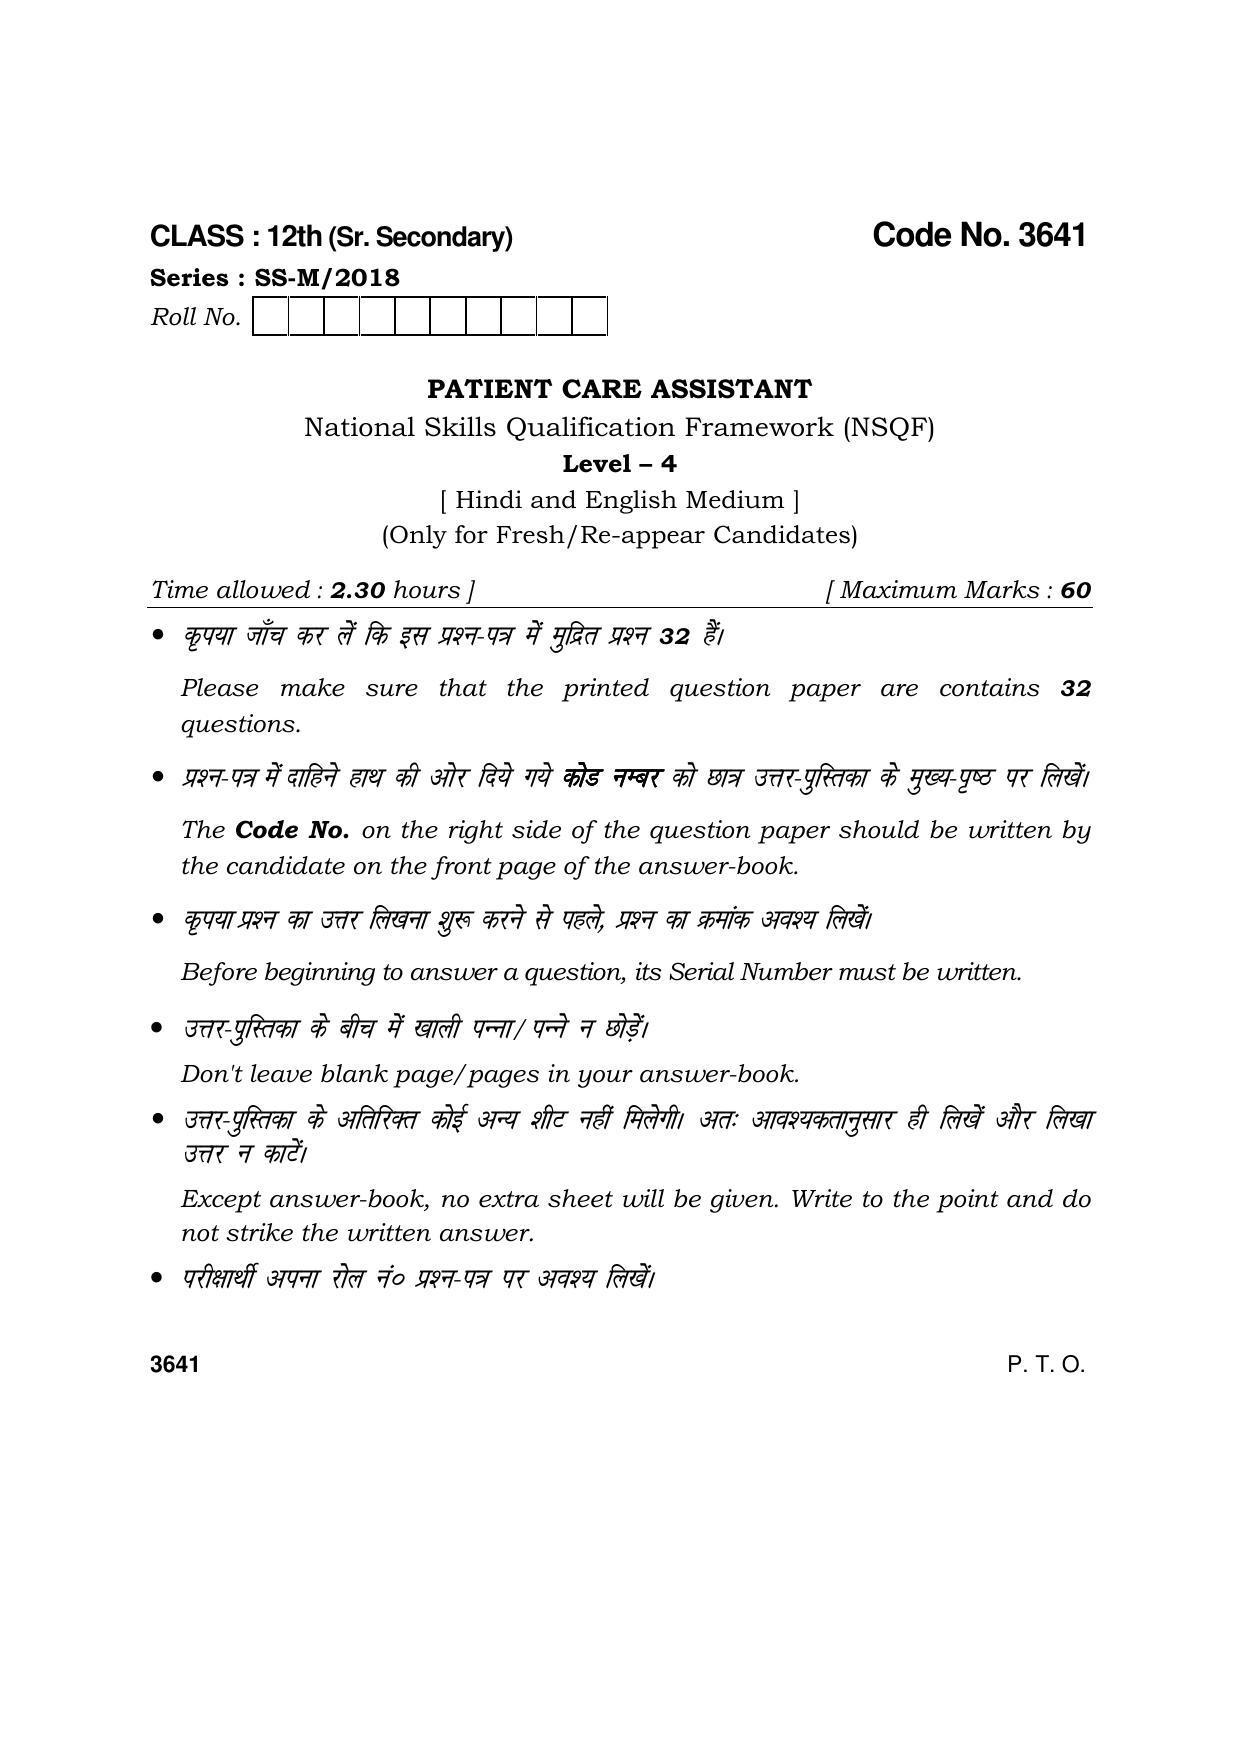 Haryana Board HBSE Class 12 Patient Care Assistant 2018 Question Paper - Page 1